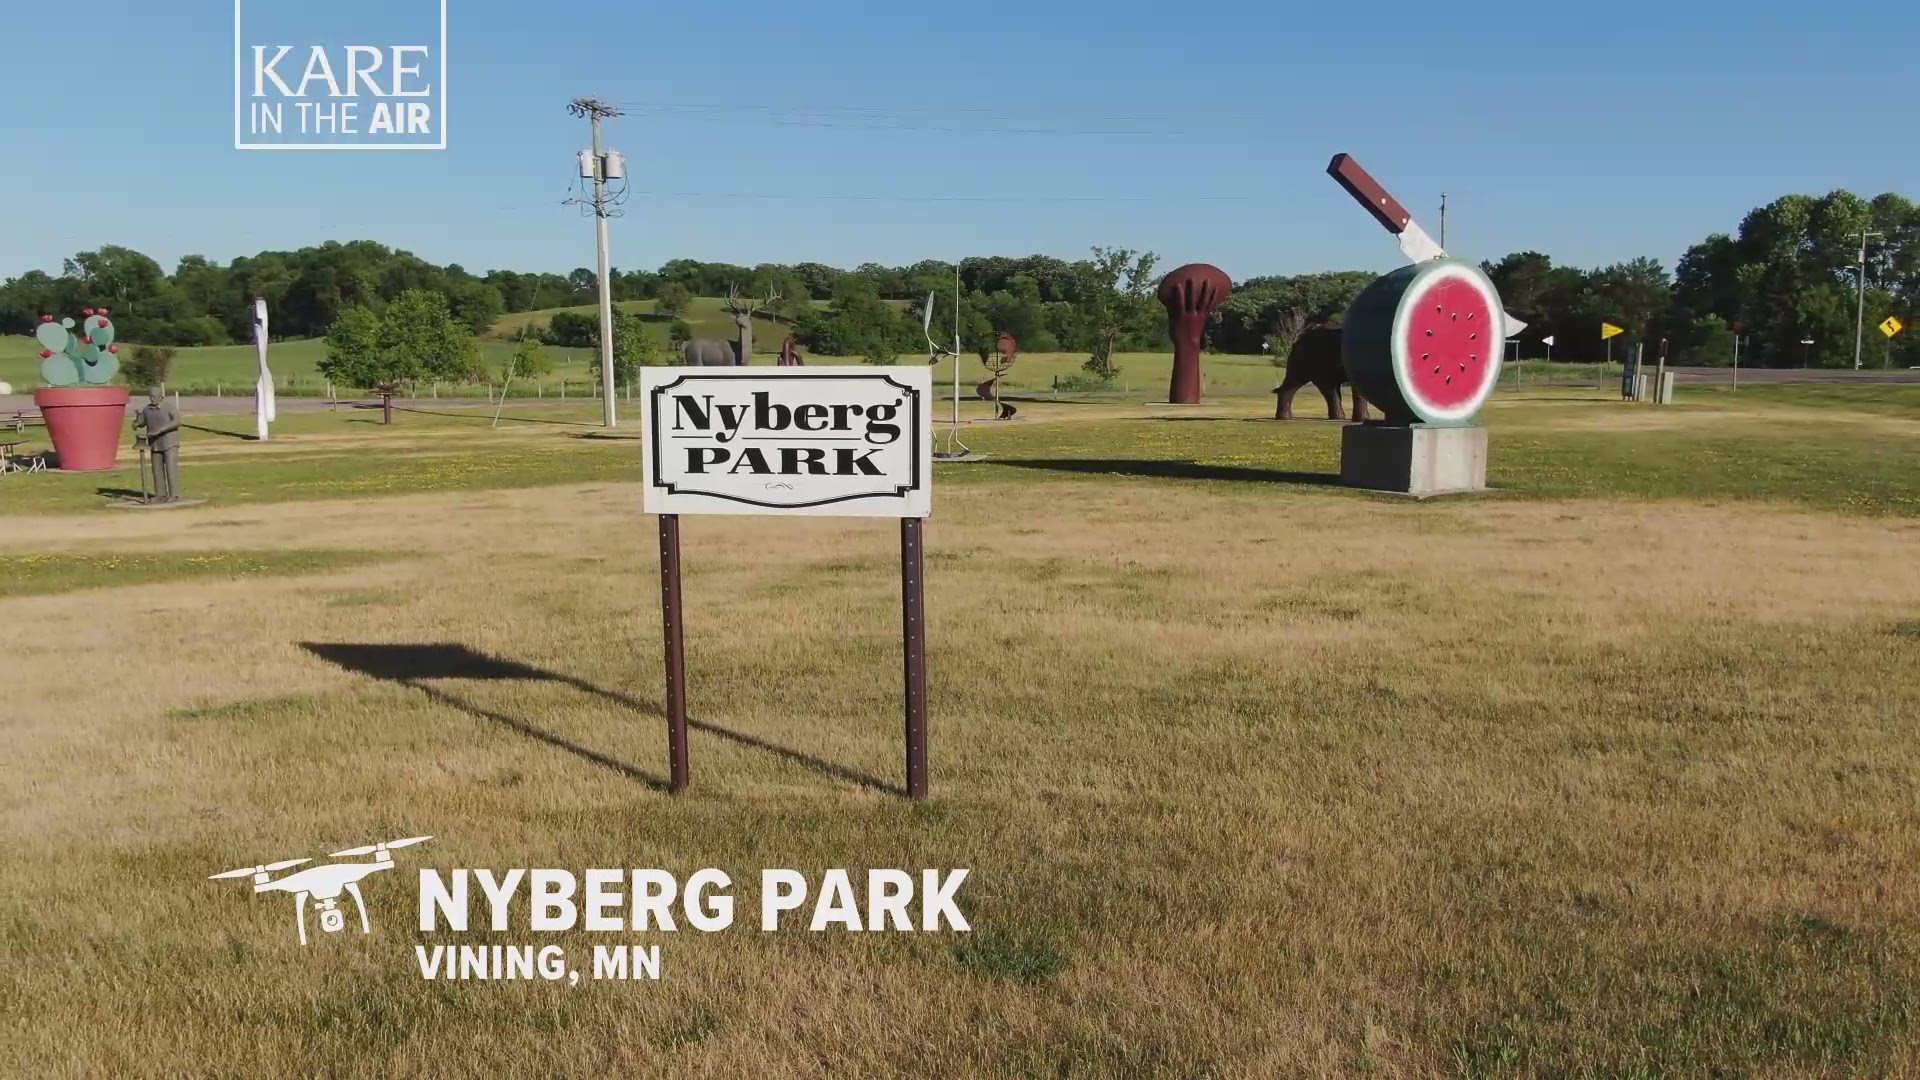 The little town of Vining, Minnesota is home to a most unusual sculpture garden, thanks to Ken Nyberg, his welding torch and a bunch of lawn mower blades.